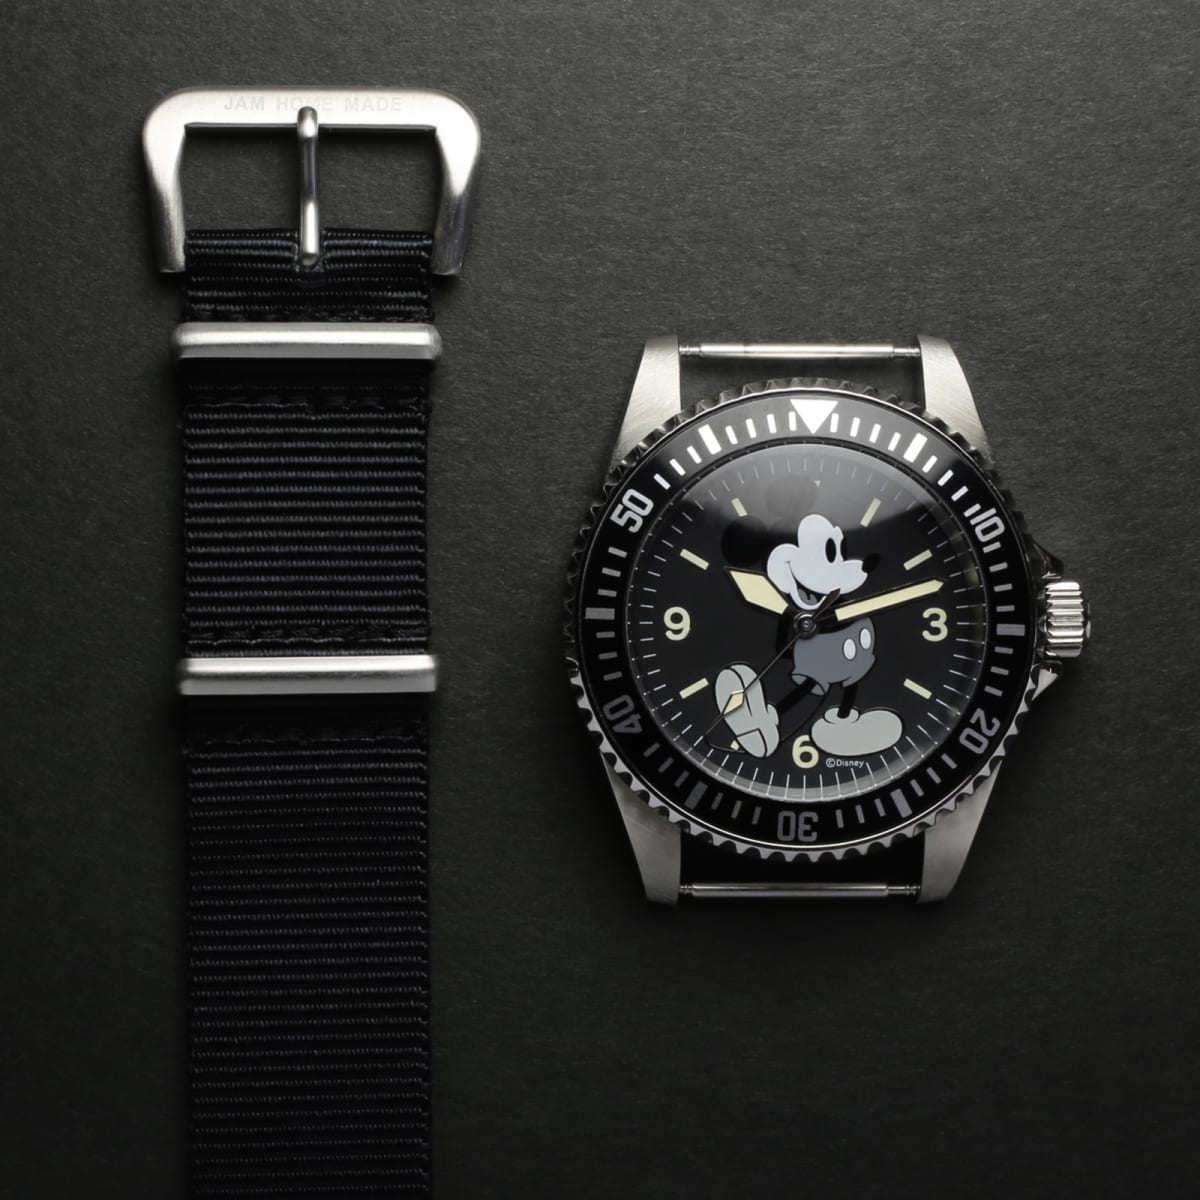 Jam Home Made and Bounty Hunter release a dive watch-inspired